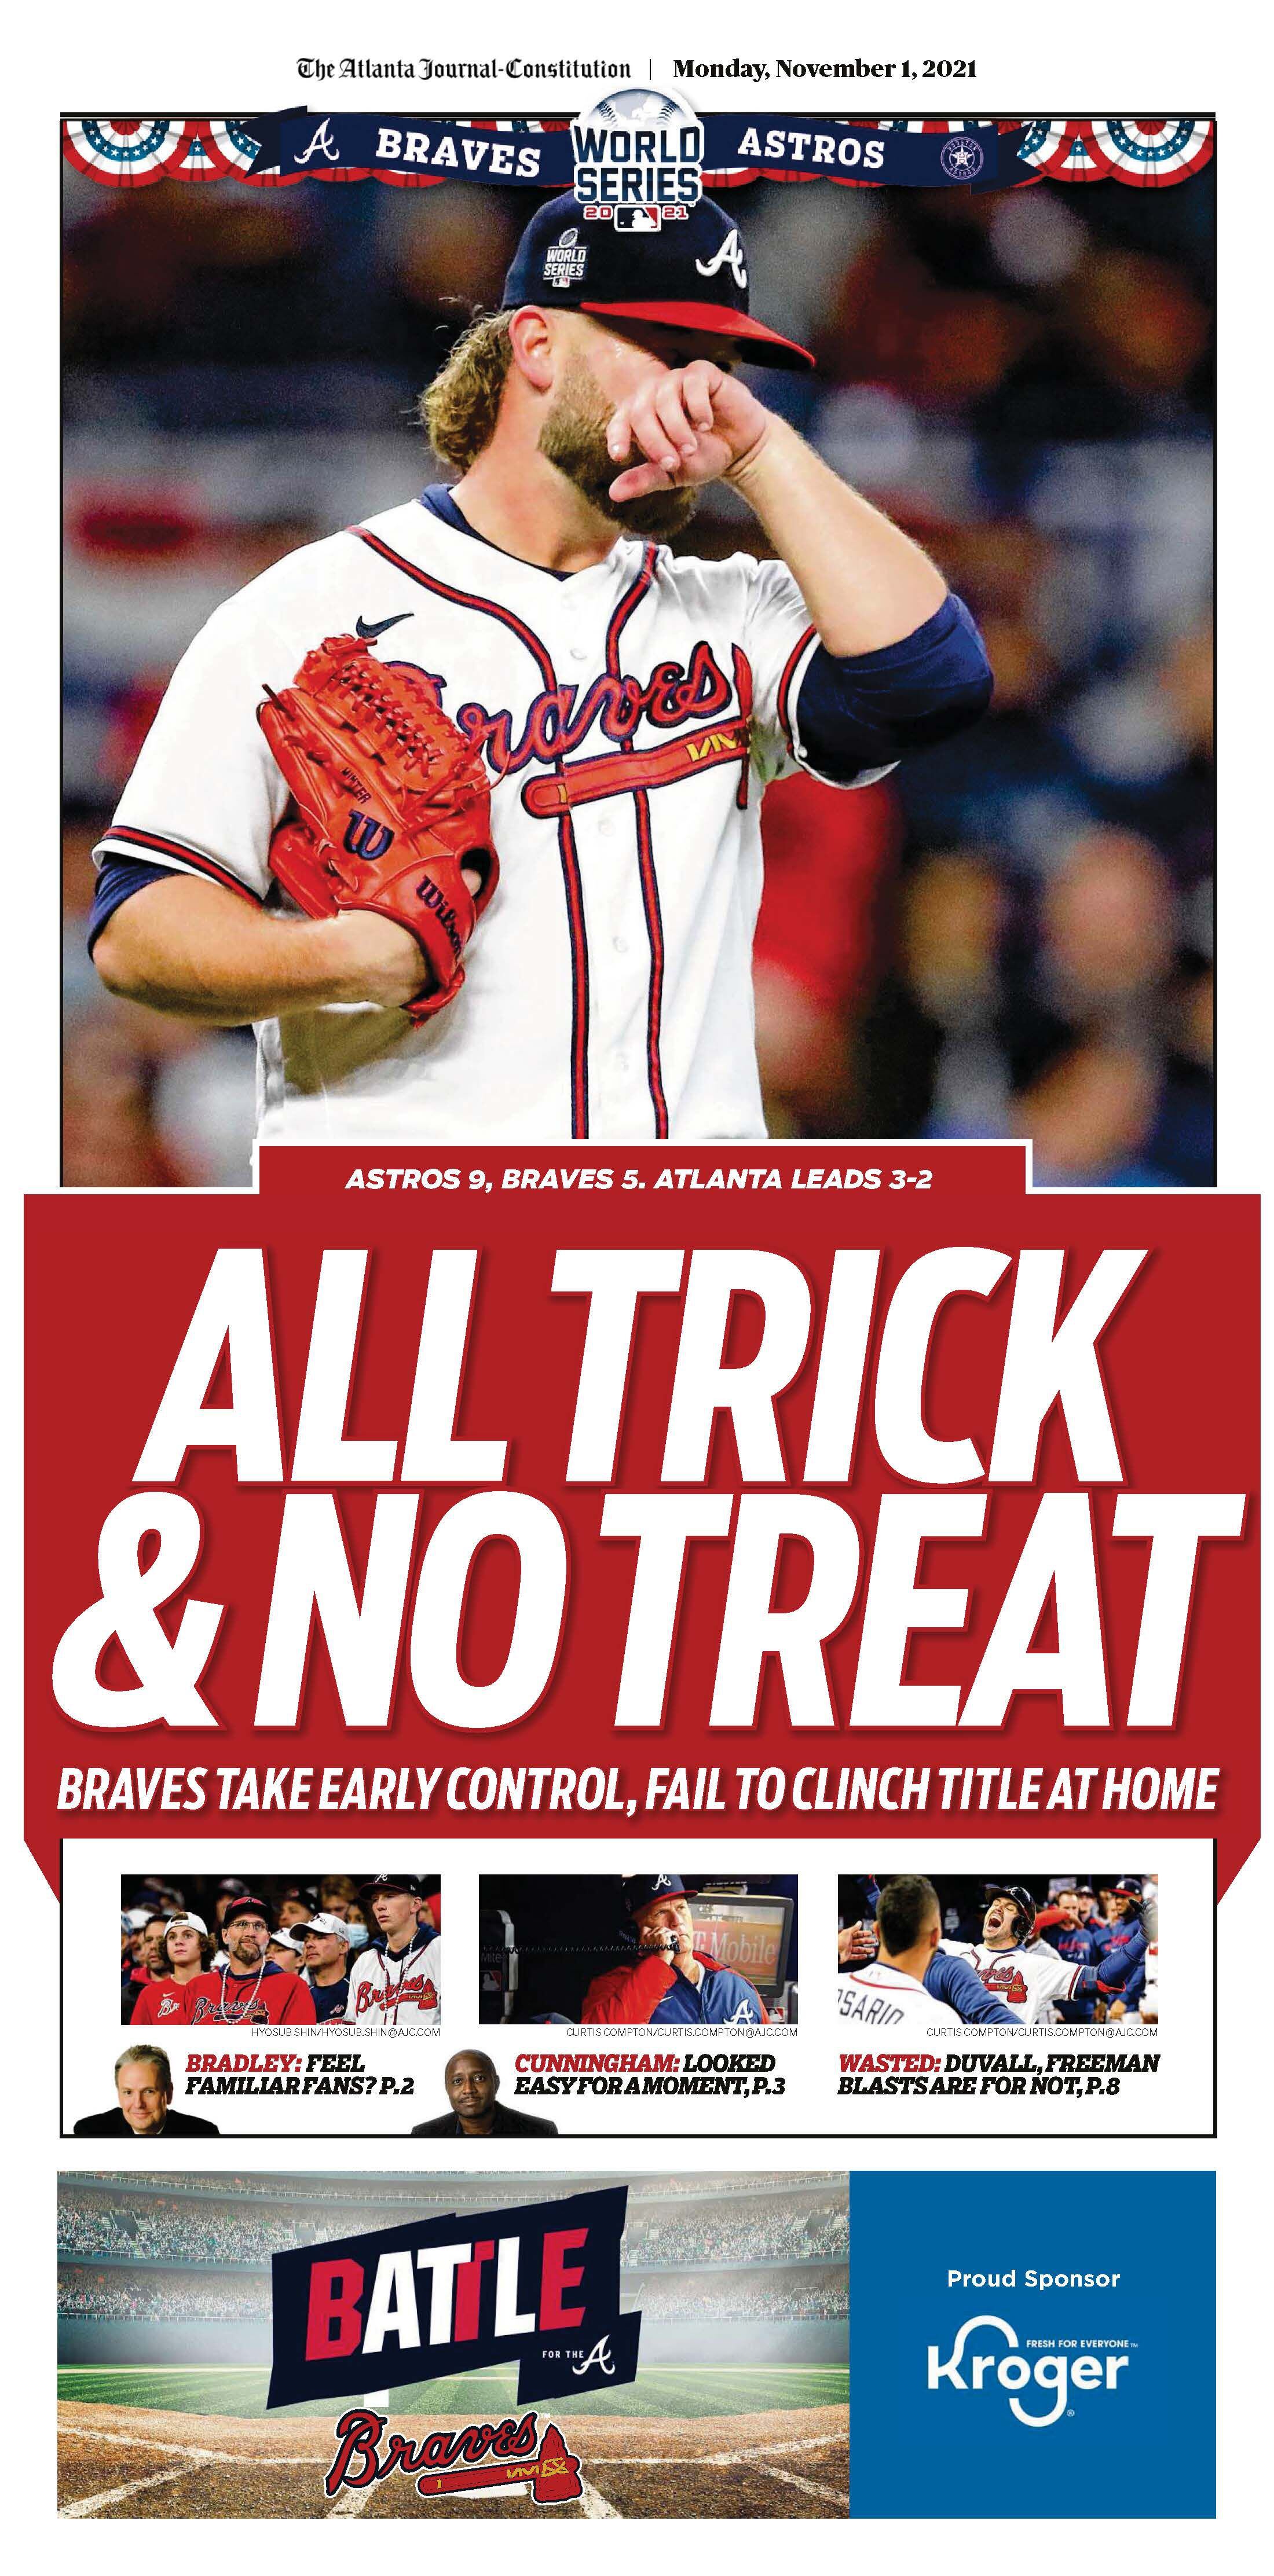 Atlanta Braves World Series Champs 16 Page Special Edition AJC Newspaper  11/4/21